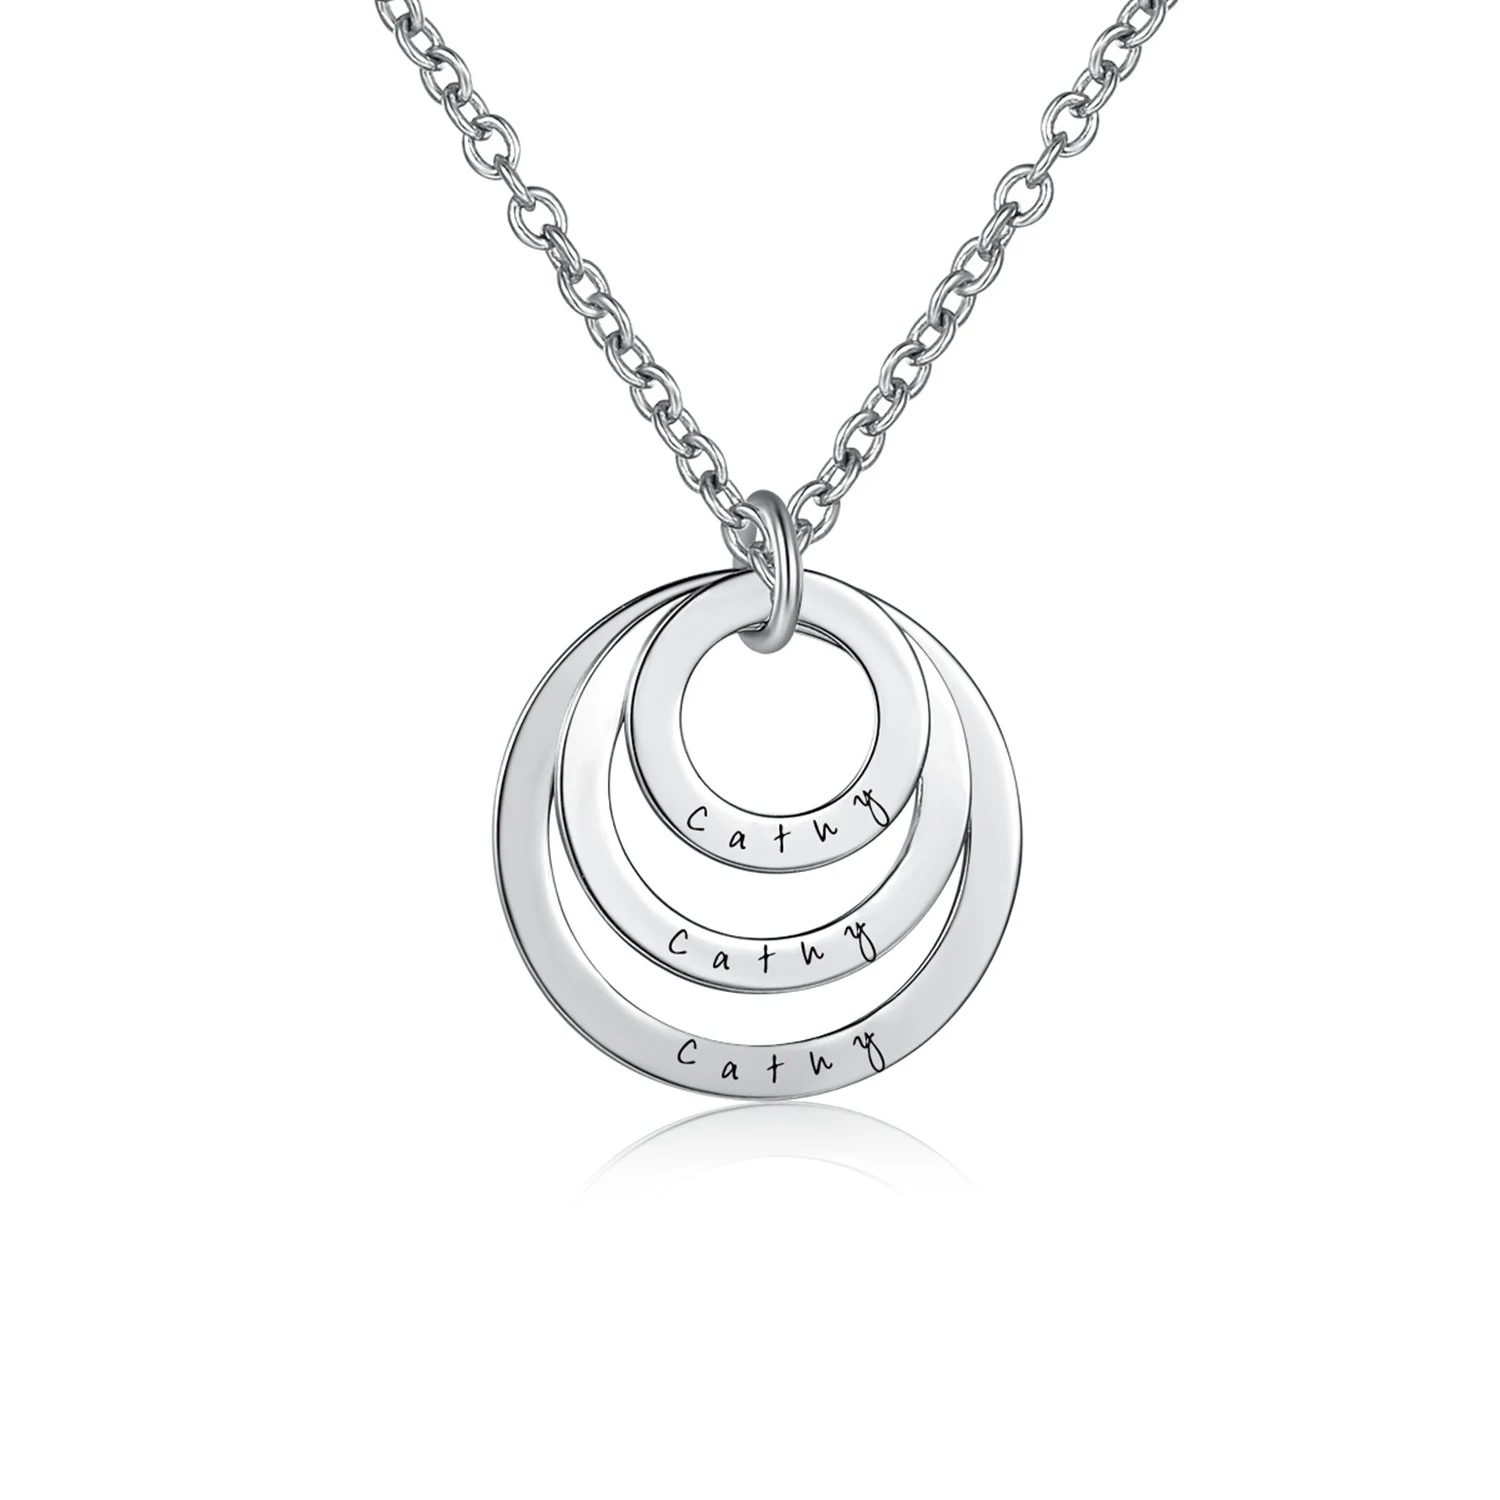  925 silver rhodium plating pendant necklace personalized necklace Stylish Jewelry Manufacturer(图1)